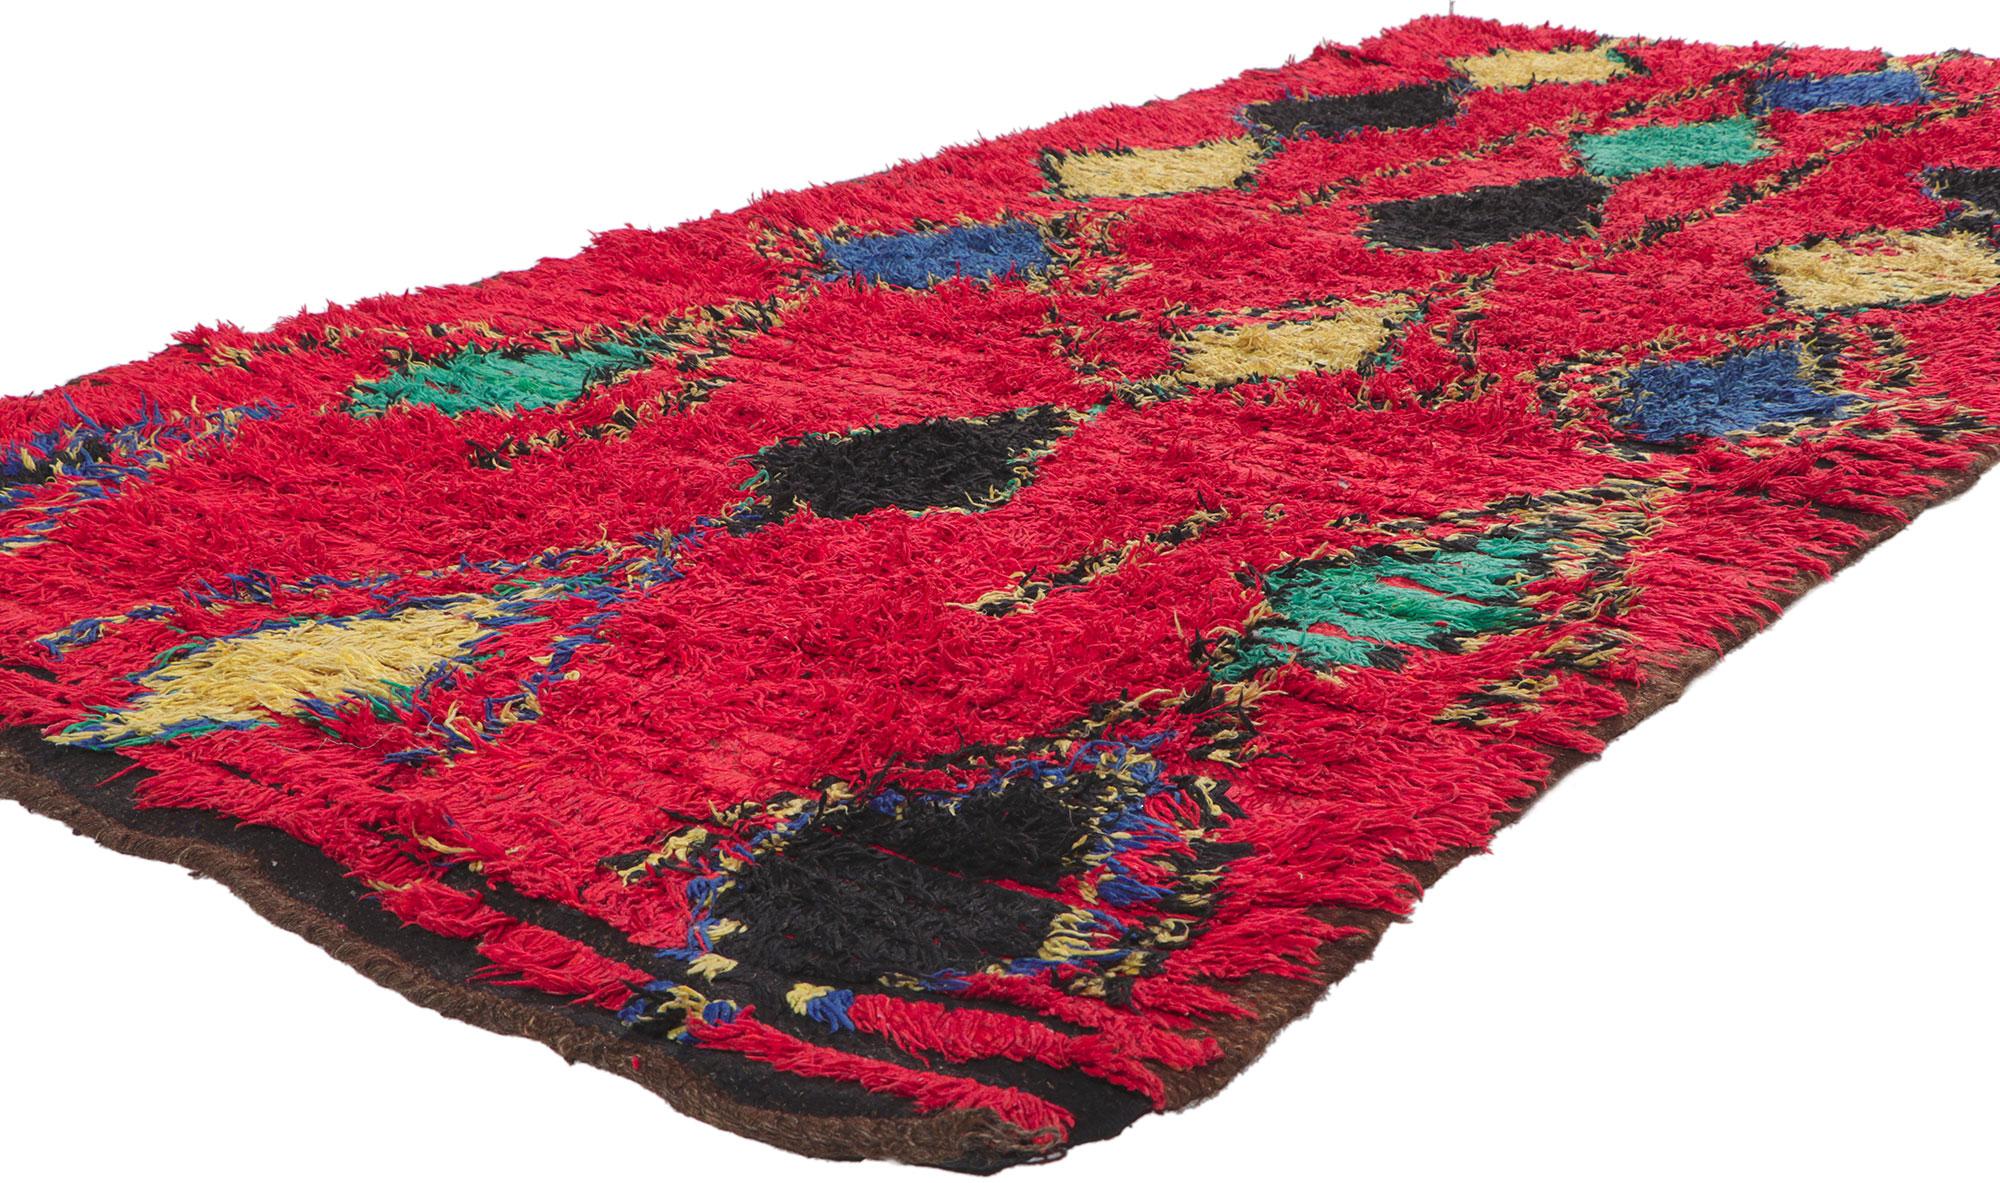 78386 Vintage Moroccan rug, 04'08 x 10'02. With its nomadic charm, incredible detail and texture, this hand knotted wool vintage Moroccan rug is a captivating vision of woven beauty. The eye-catching diamond pattern and energetic colors woven into